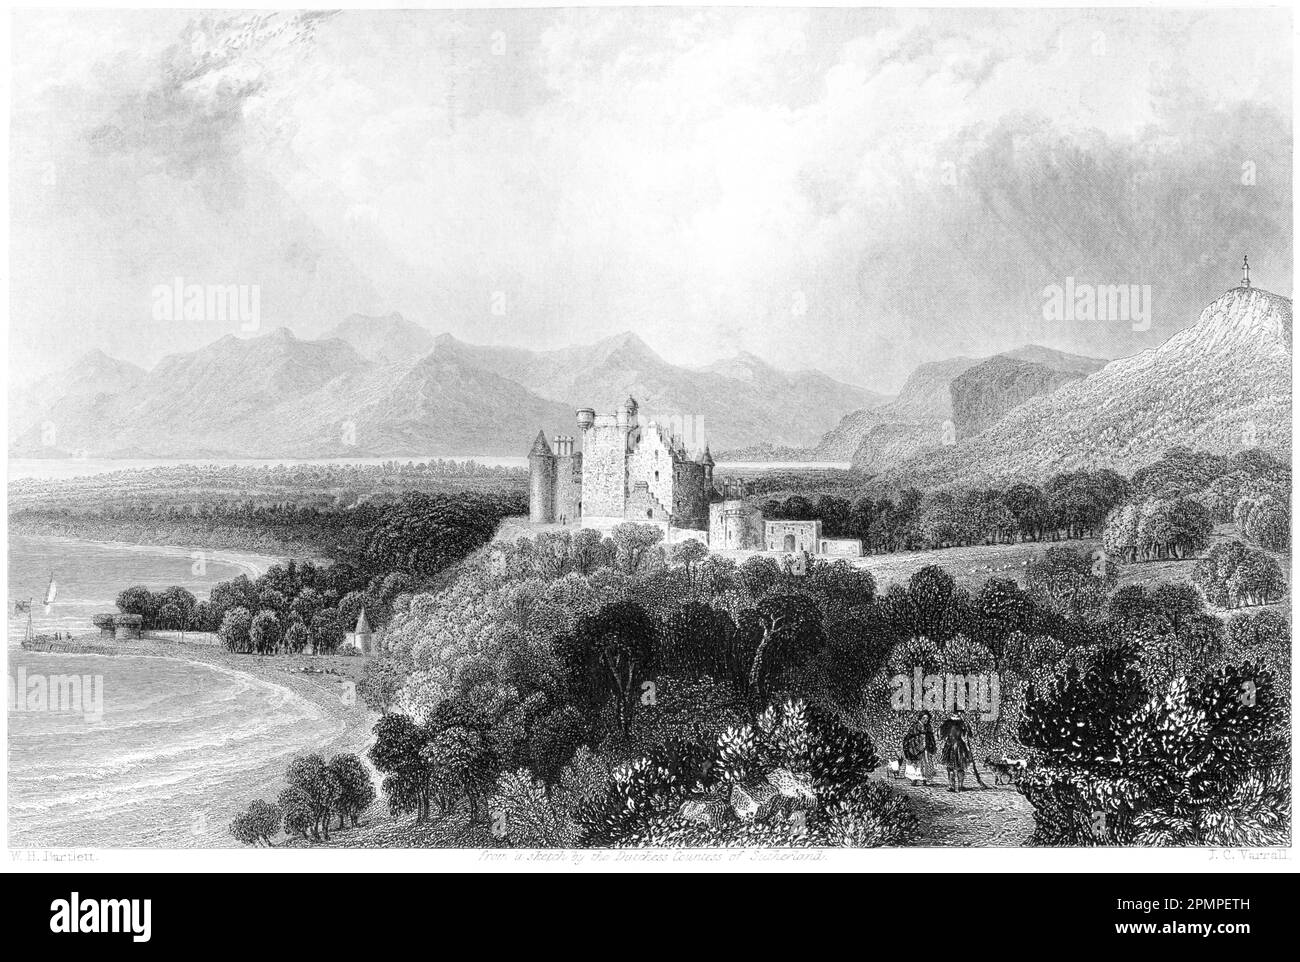 An engraving of Dunrobin Castle, Sutherlandshire, Scotland UK scanned at high resolution from a book printed in 1840. Believed copyright free. Stock Photo